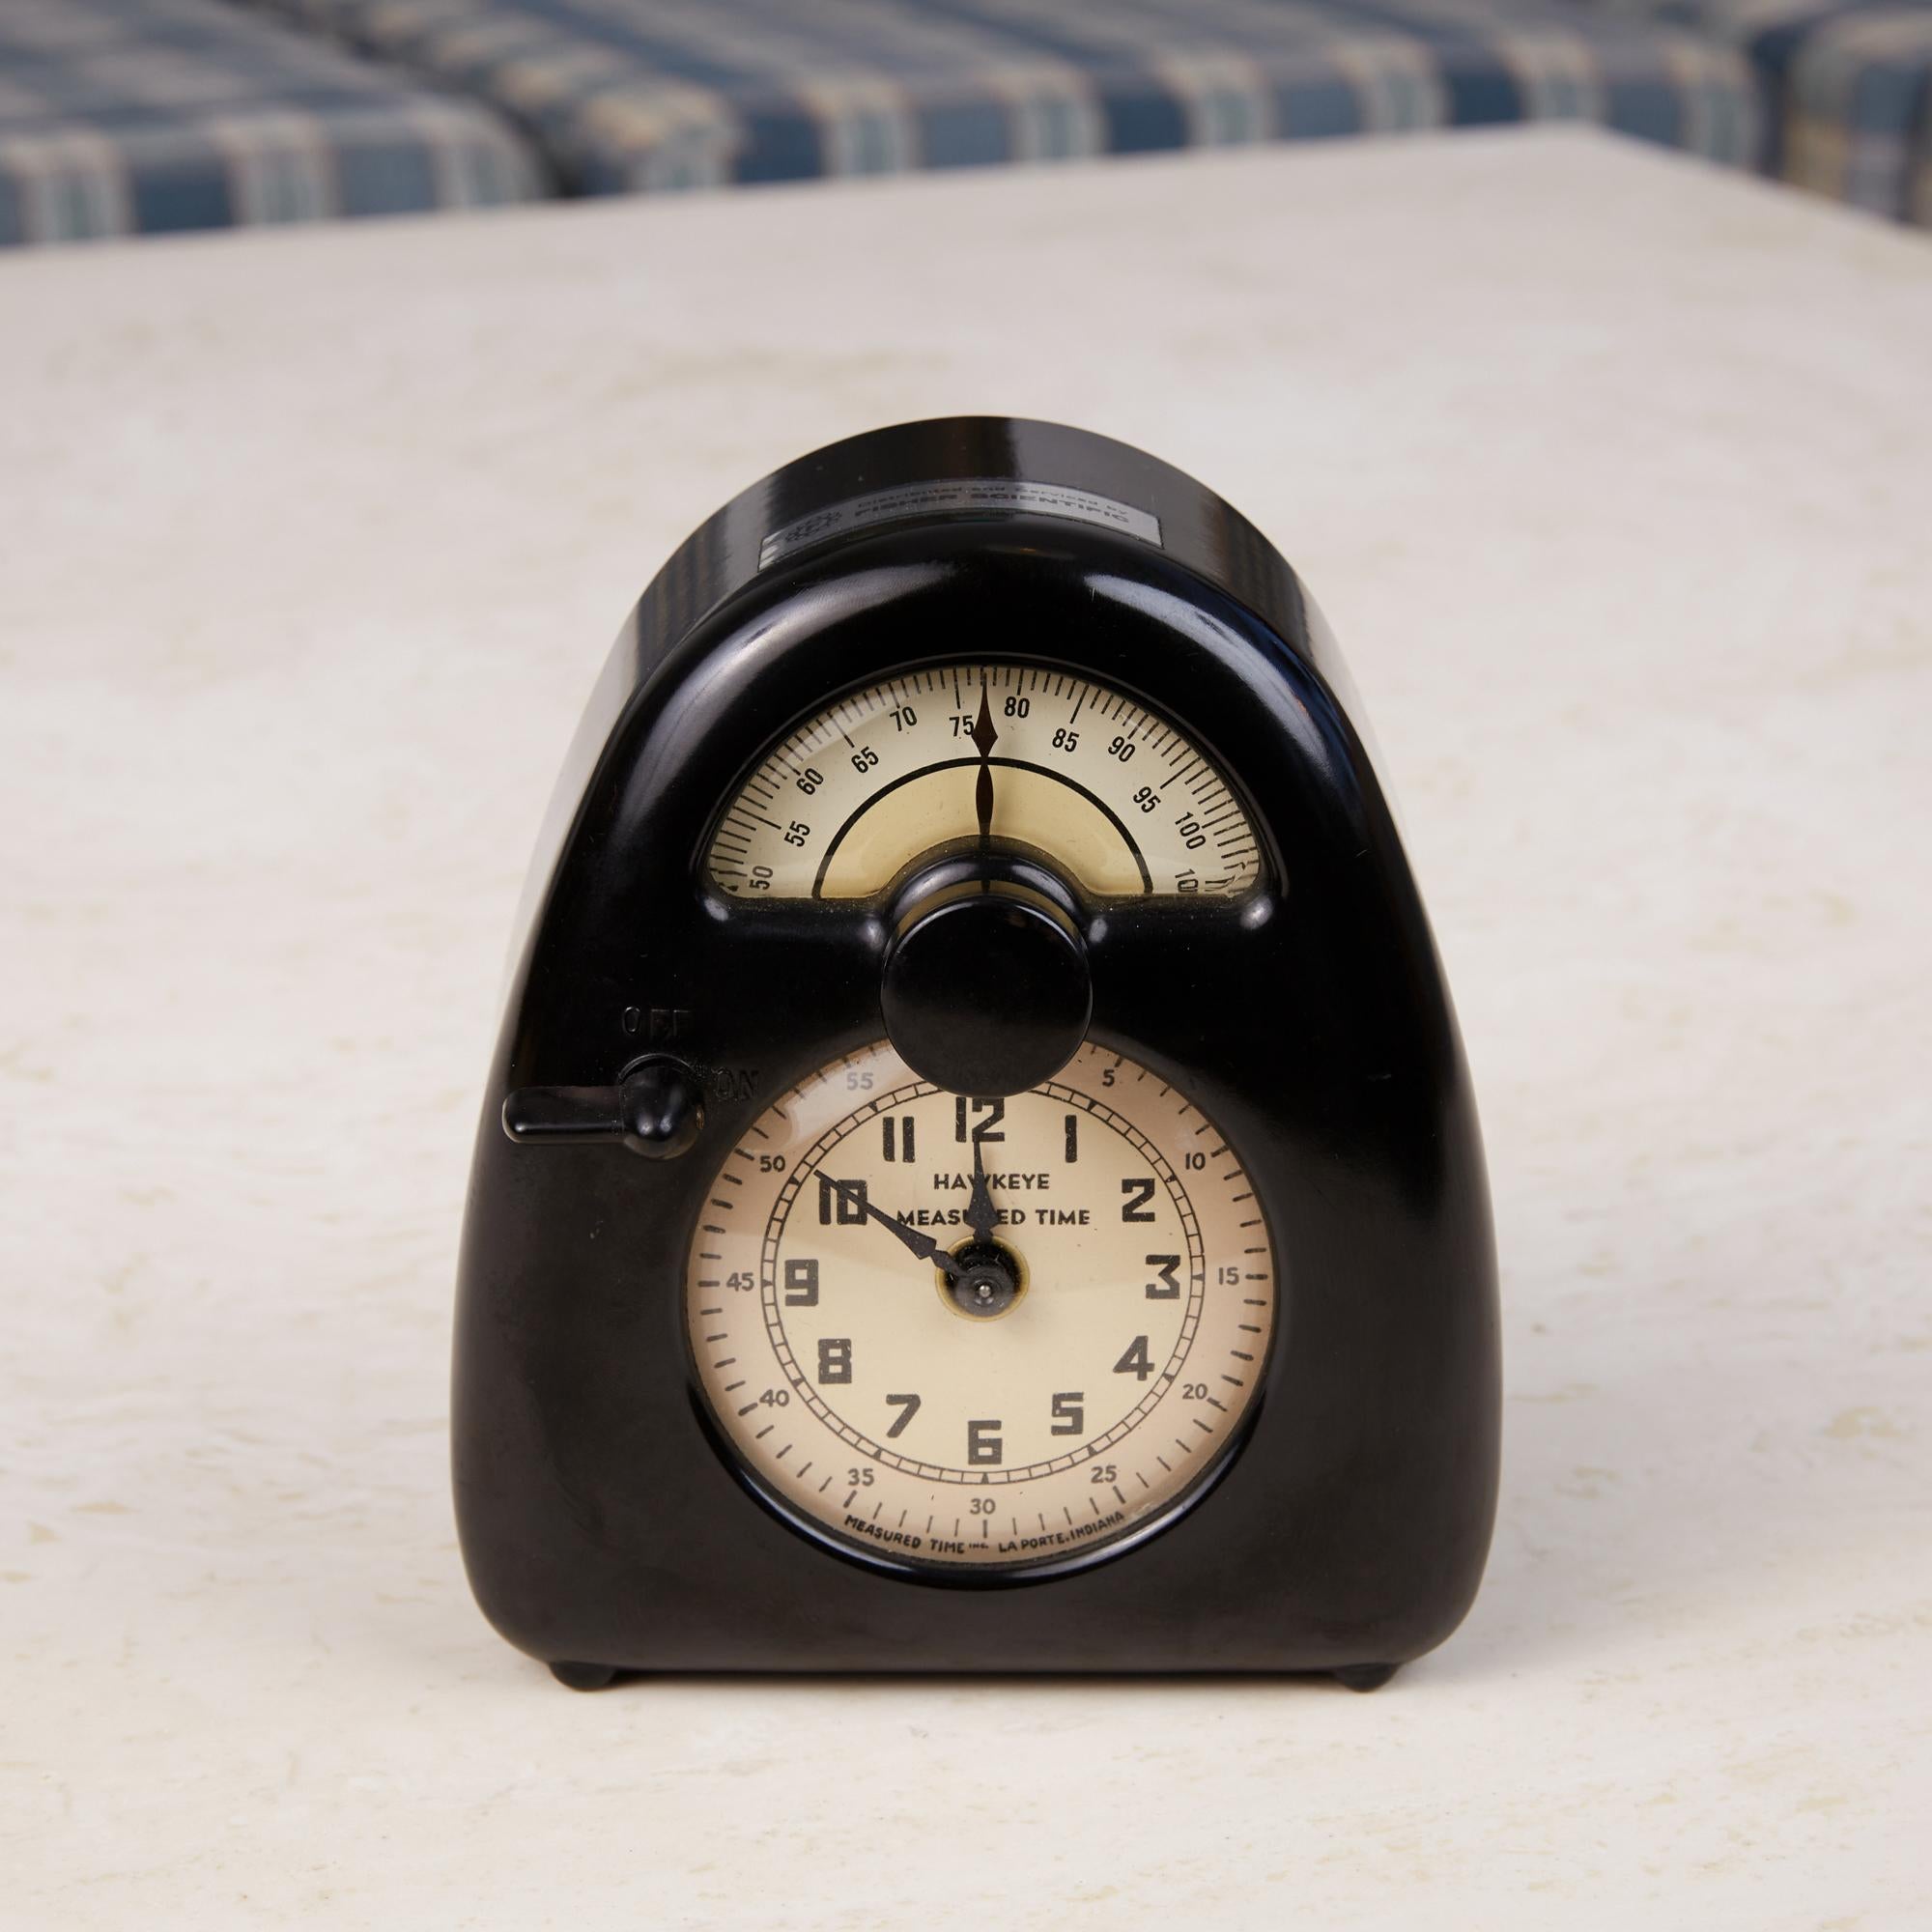 Hawkeye kitchen timer and clock by Isamu Noguchi, c.1930s. This 1932 design was Isamu Noguchi's first commercial design. The pieces features an arched black Bakelite frame that houses a clock in the lower portion and a 120 minute timer in the top